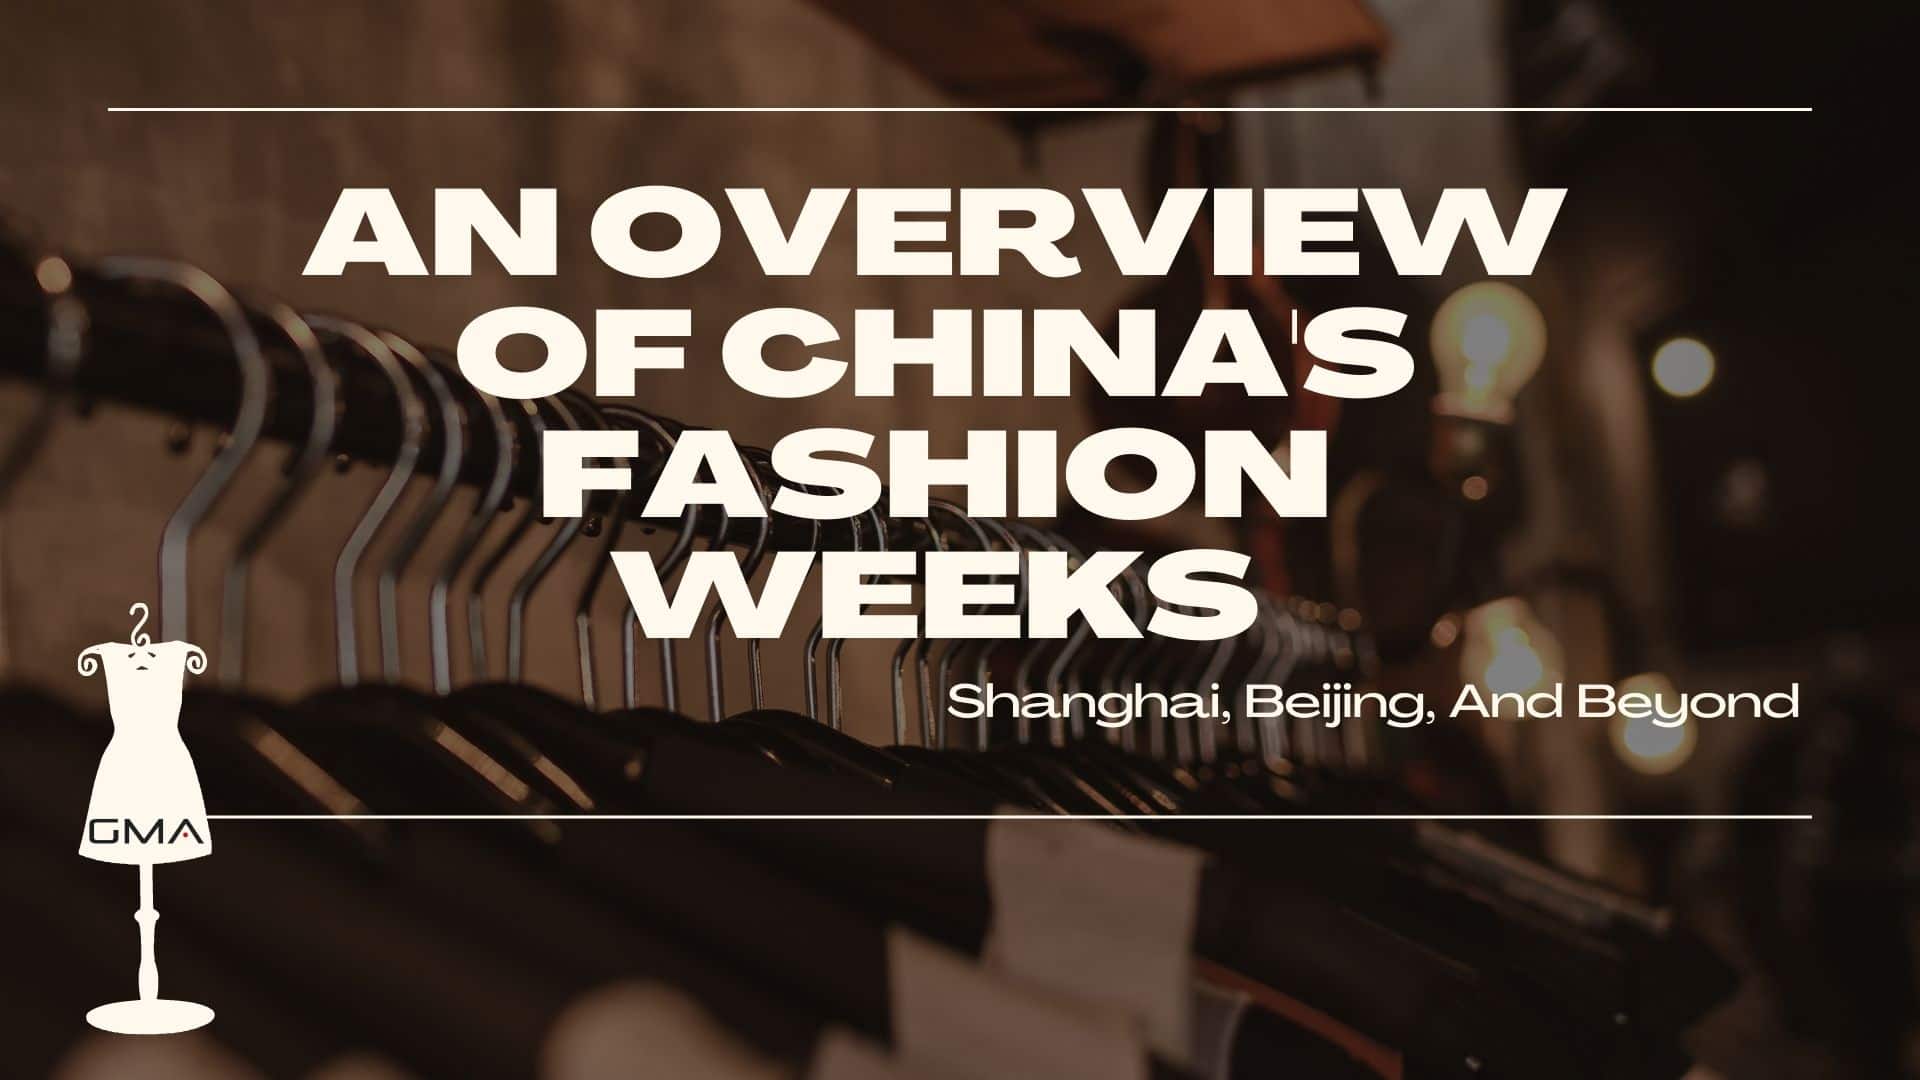 An Overview Of China's Fashion Weeks: Shanghai, Beijing, And Beyond